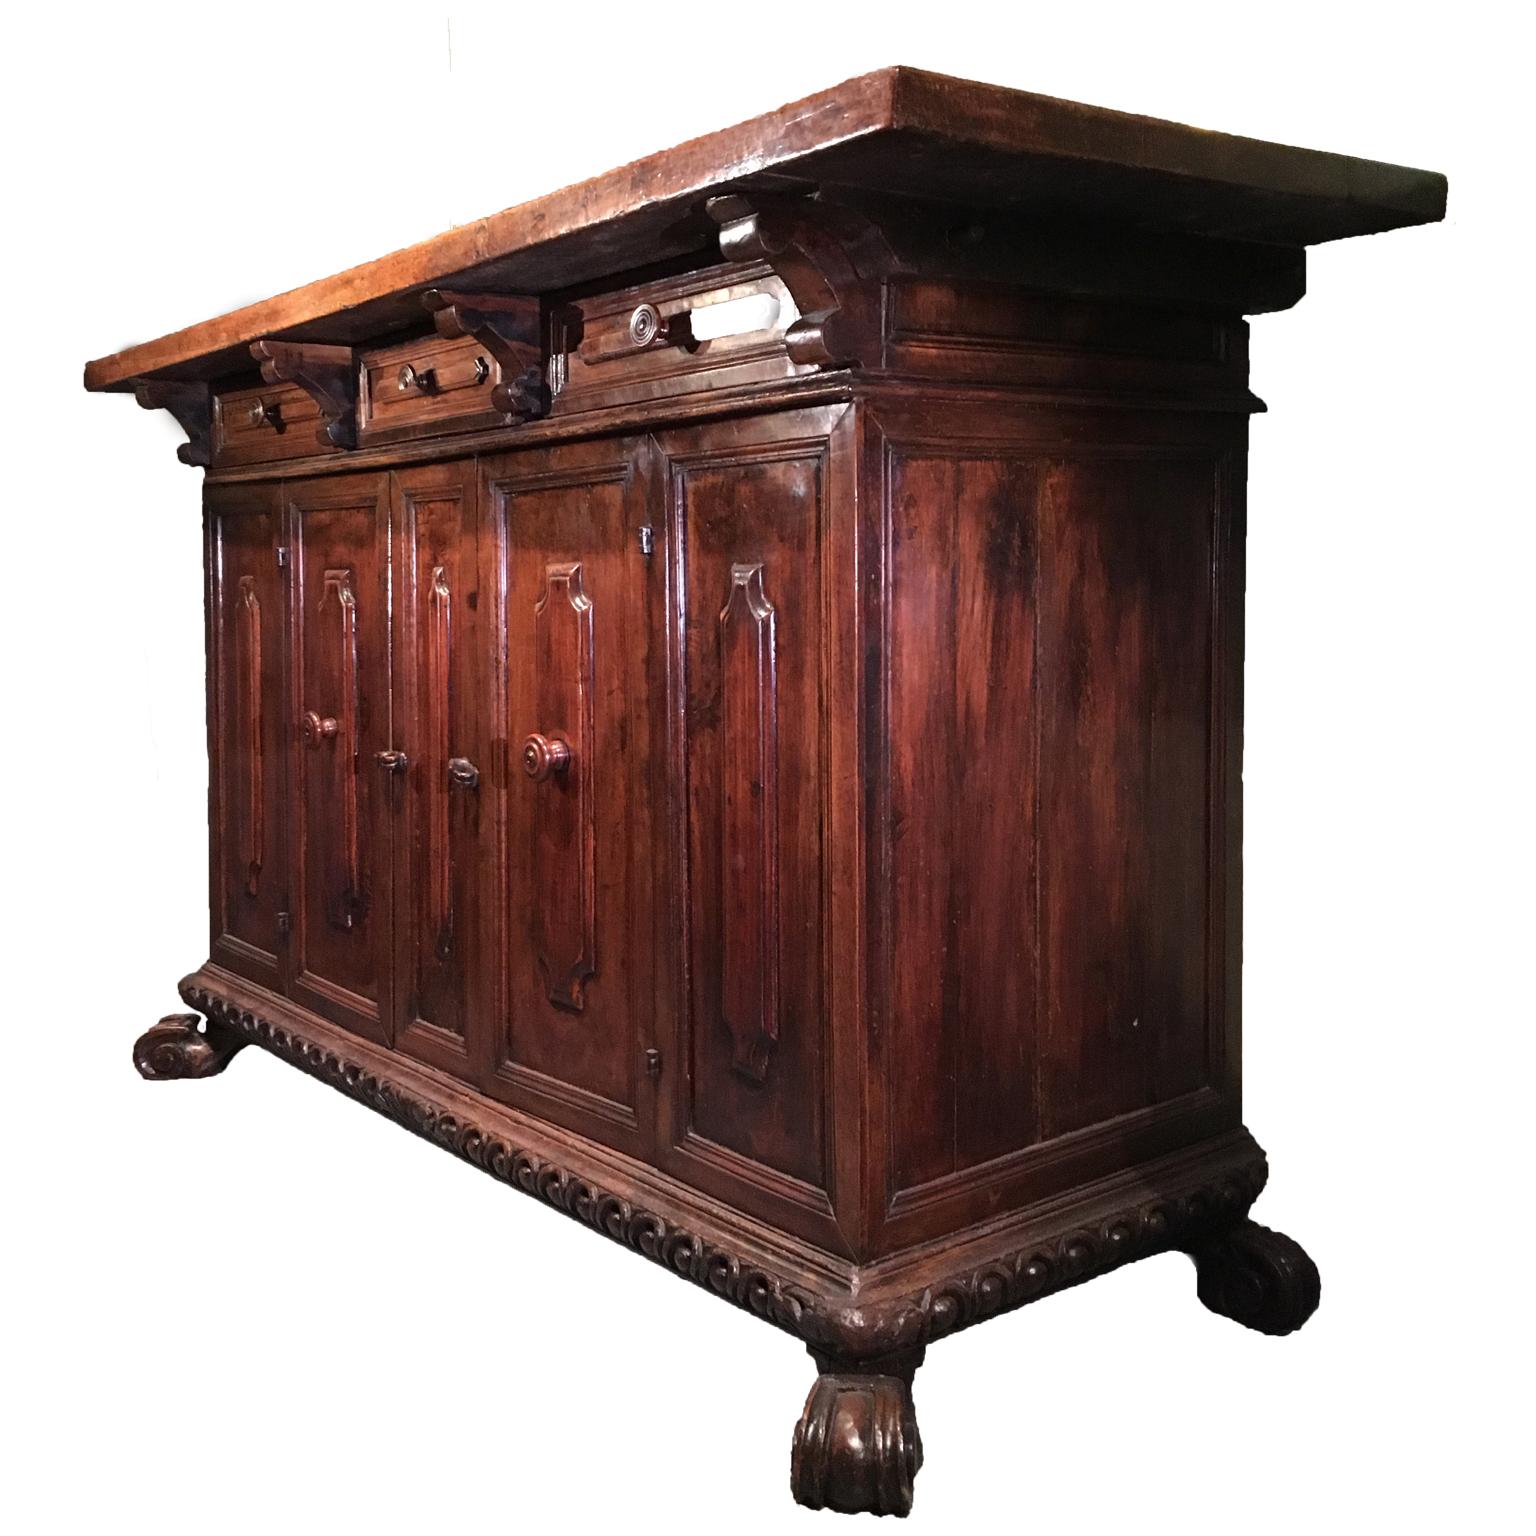 Renaissance Late 17th Century Italian Carved Credenza in Solid Walnut Wood For Sale